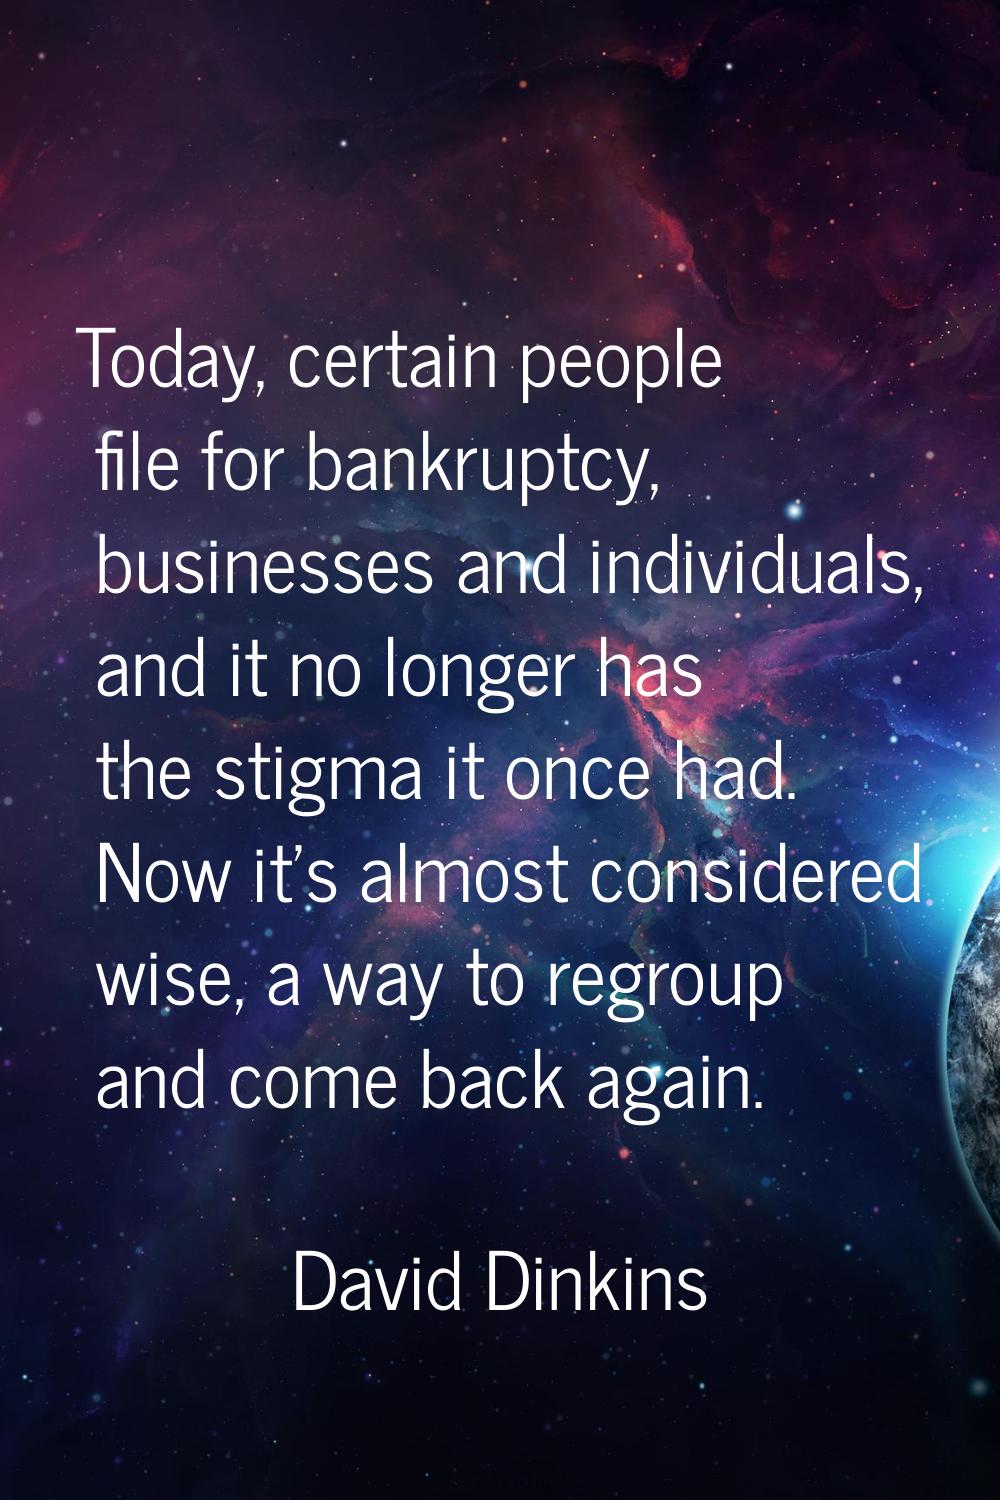 Today, certain people file for bankruptcy, businesses and individuals, and it no longer has the sti